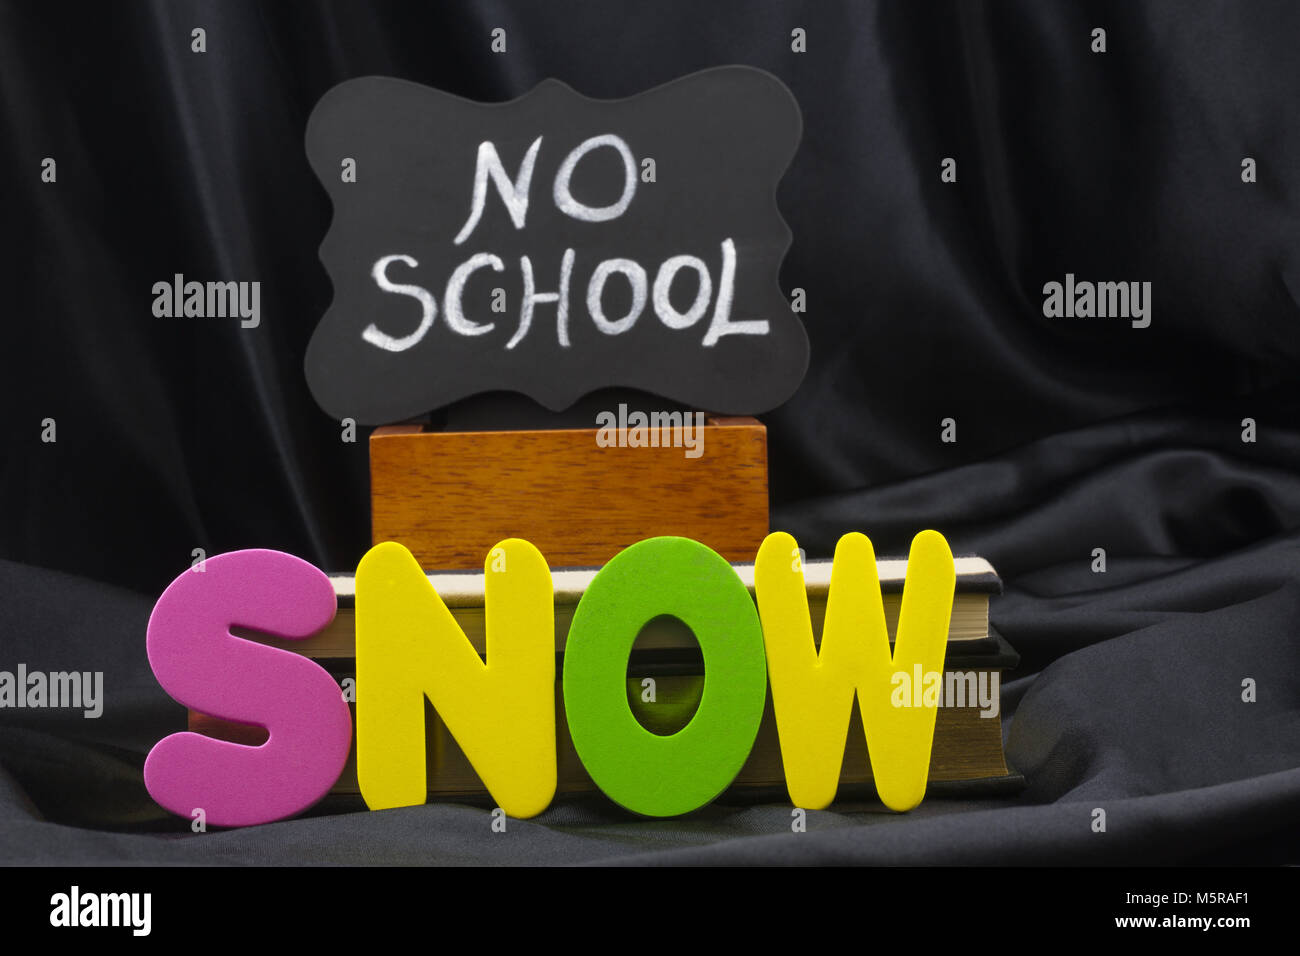 SNOW letters in front of a chalkboard NO SCHOOL sign reflects a winter weather safety closing for area schools.  Letters and signage with black backgr Stock Photo